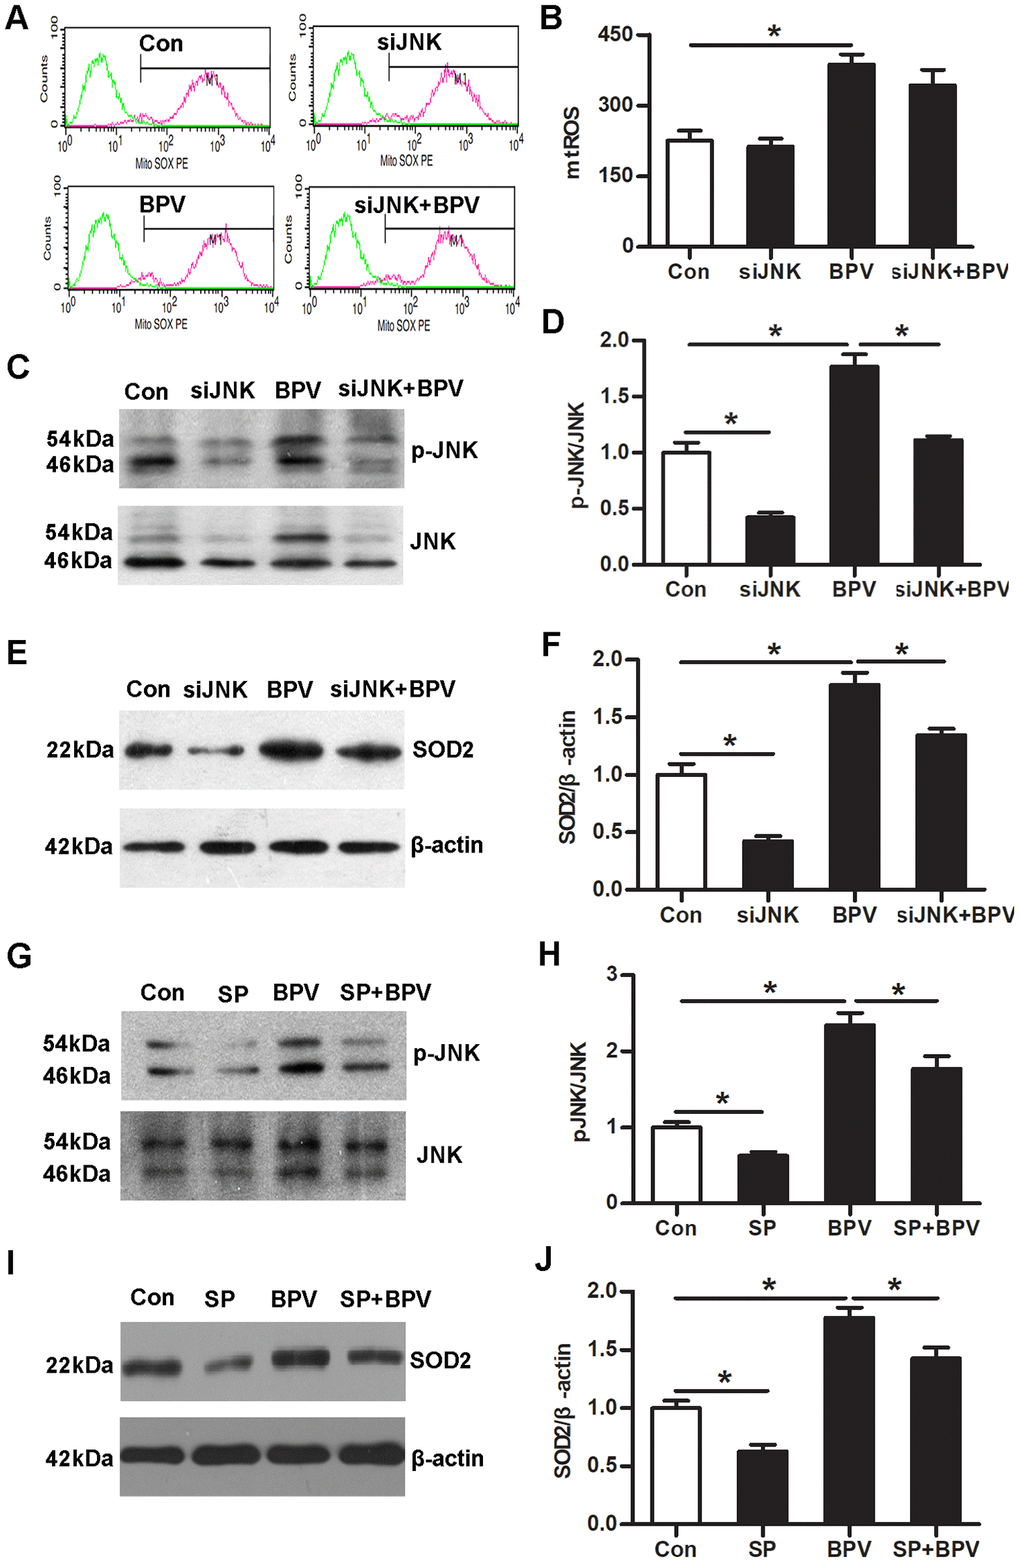 JNK signaling up-regulated of SOD2 transcription in BPV-induced neuron oxidative stress. (A–F) the effect of JNK gene knock-down on the mtROS production, JNK phosphorylation and SOD2 transcription in cells treated with BPV. Con: cells transfected with silencer negative control siRNA; siJNK: cells transfected with JNK siRNA. BPV: cells transfected with silencer negative control siRNA and treated with 2.0 mM BPV for 60 min; siJNK+BPV: cells transfected with JNK siRNA and treated with 2.0 mM BPV for 60 min. (G–J) The effect of sp600125 on JNK activation and SOD2 transcription in cells treated with BPV; Con: untreated cells; SP: cells cultured with 10 μM sp600125 for 30 min; BPV: cells treated with 2.0 mM BPV for 60 min; SP+BPV: cells precultured with 10 μM sp600125 for 30 min, following treated with 2.0 mM BPV for 60 min. Values are the mean± SEM of n = 3, *: P